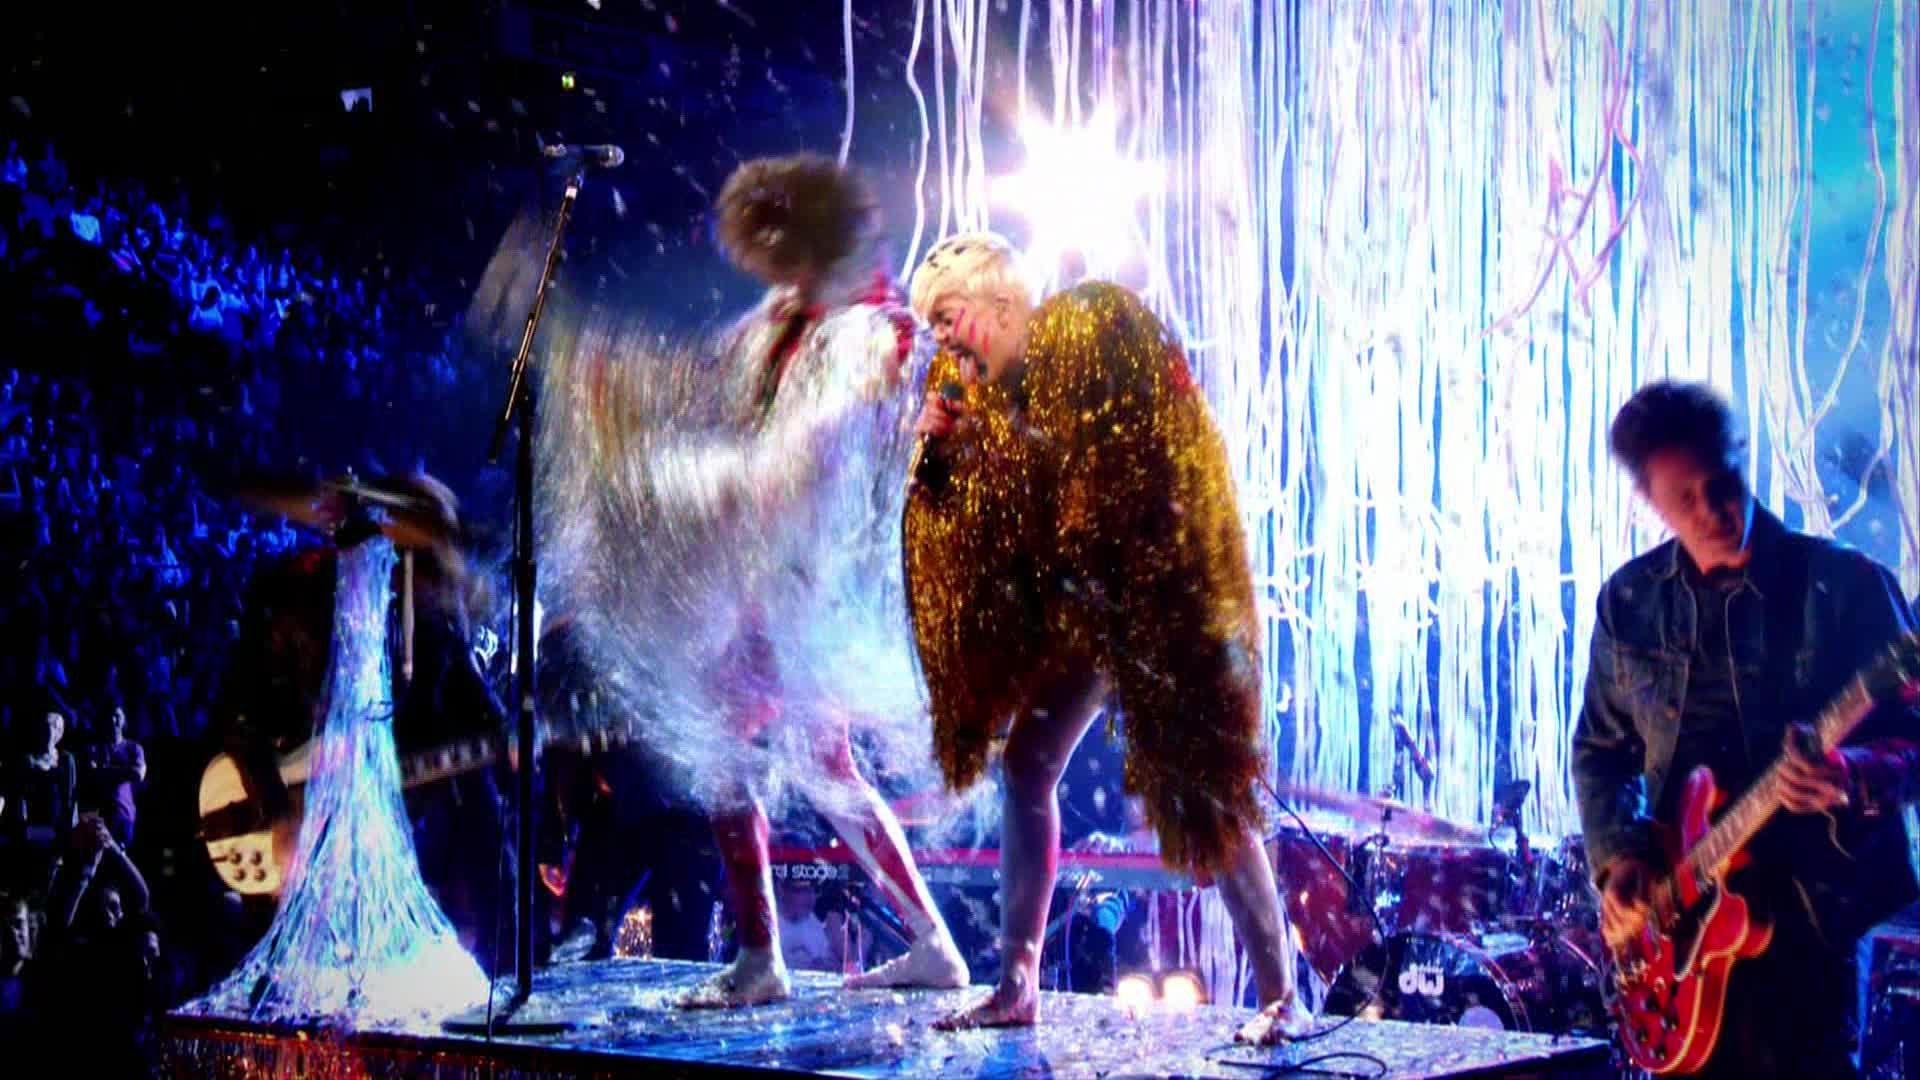 Miley Cyrus [ft The Flaming Lips] - 2014-05-18, Billboard Music Awards - 1080 TS - LSD preview 10